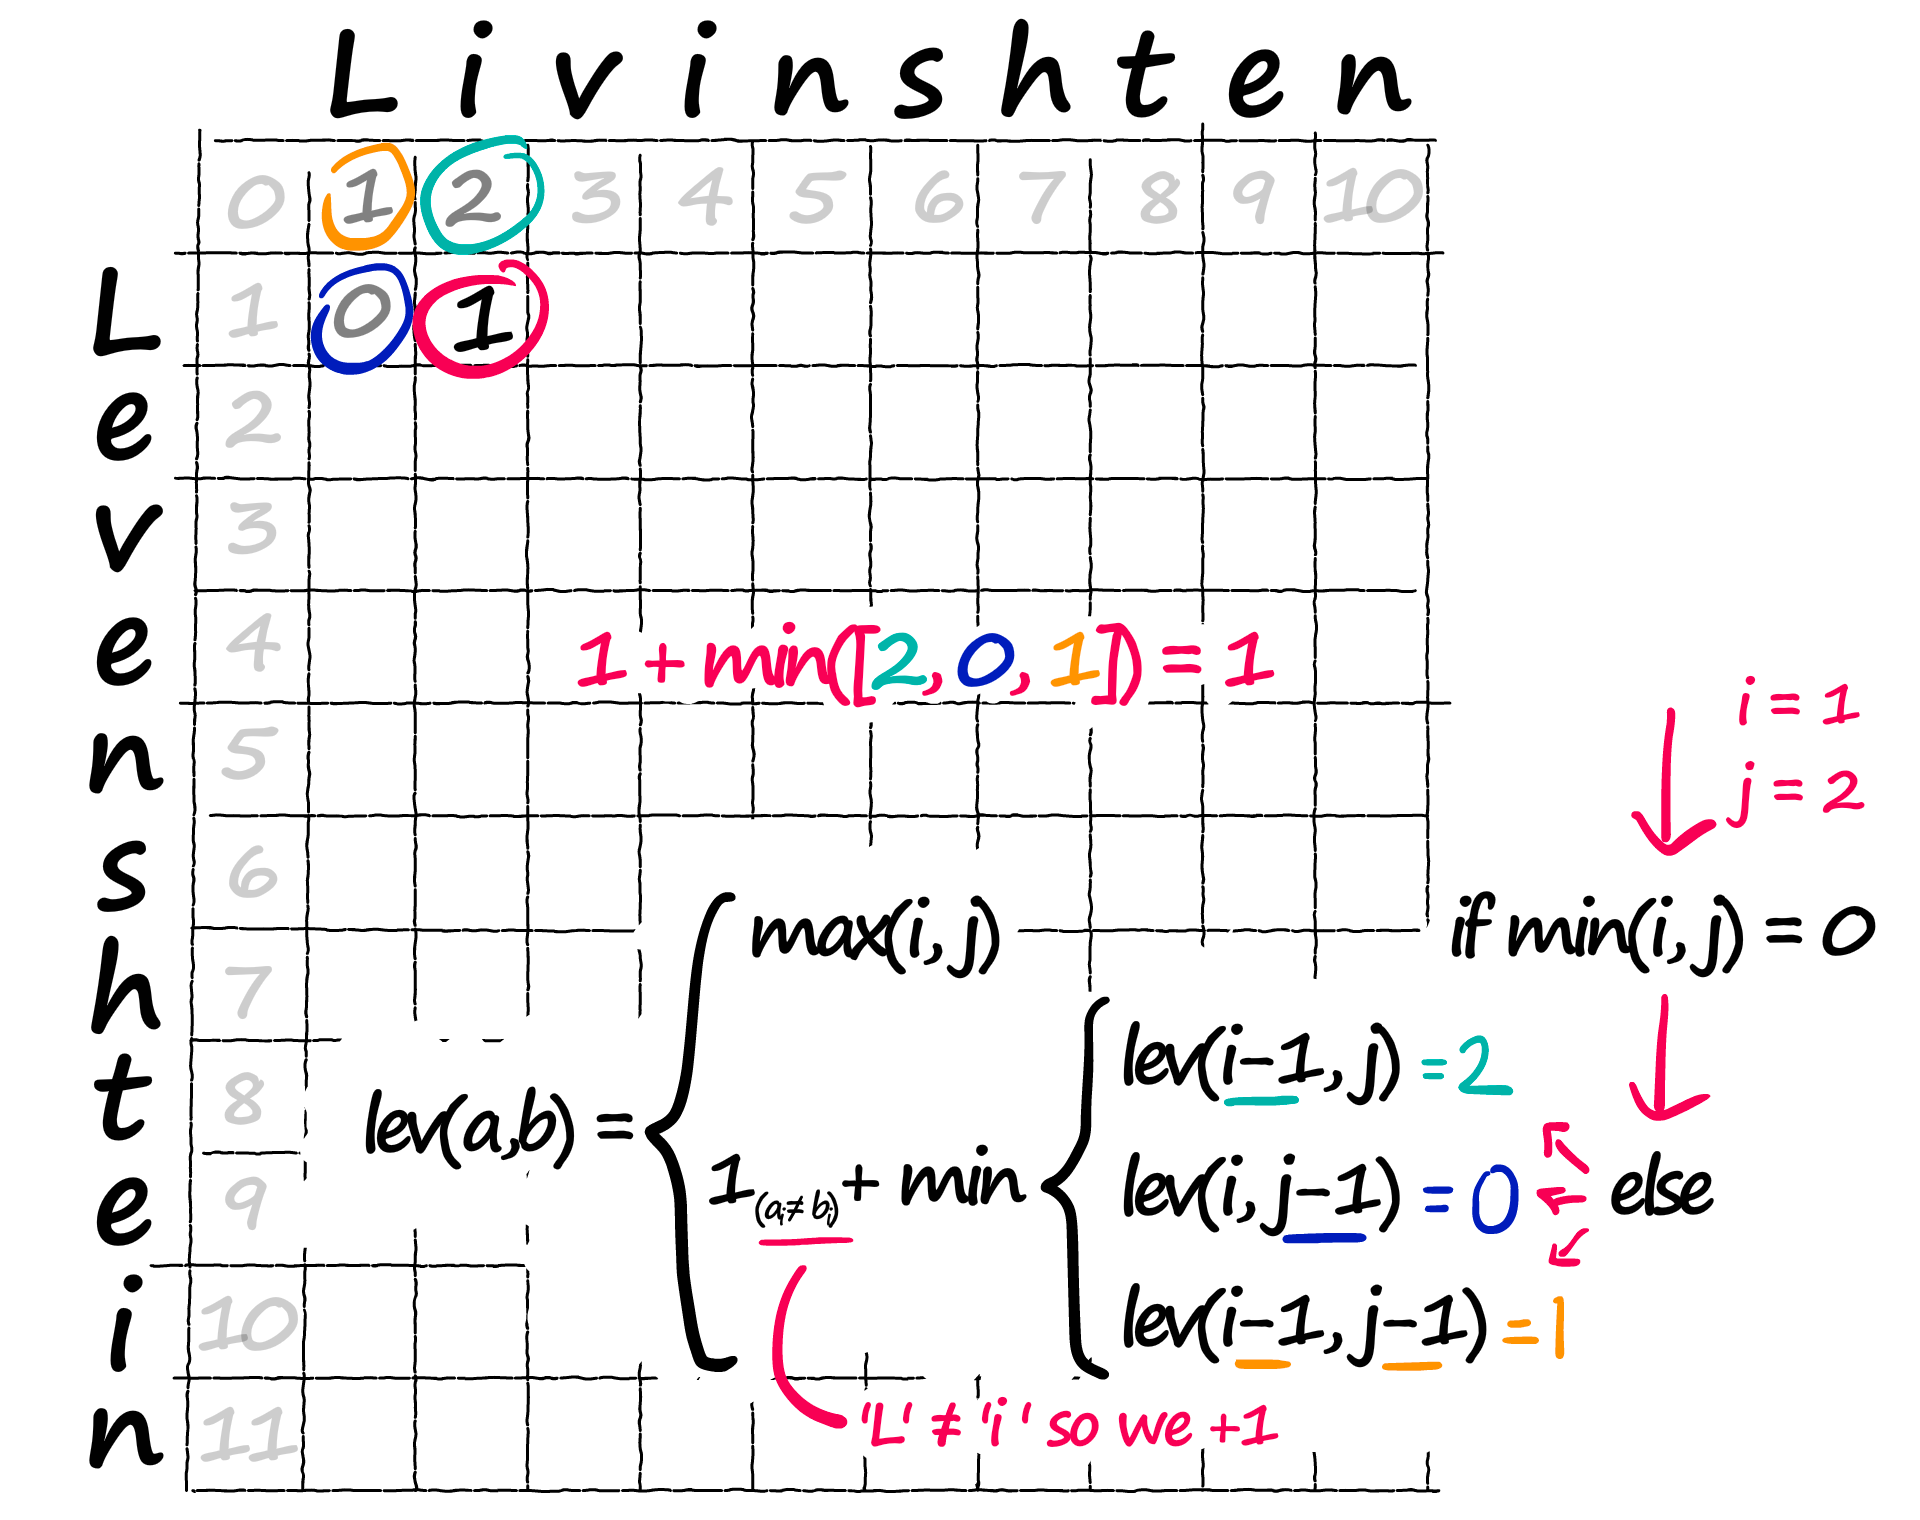 If a[i] != b[j] we add 1 to our minimum value — this is the penalty for mismatched characters.